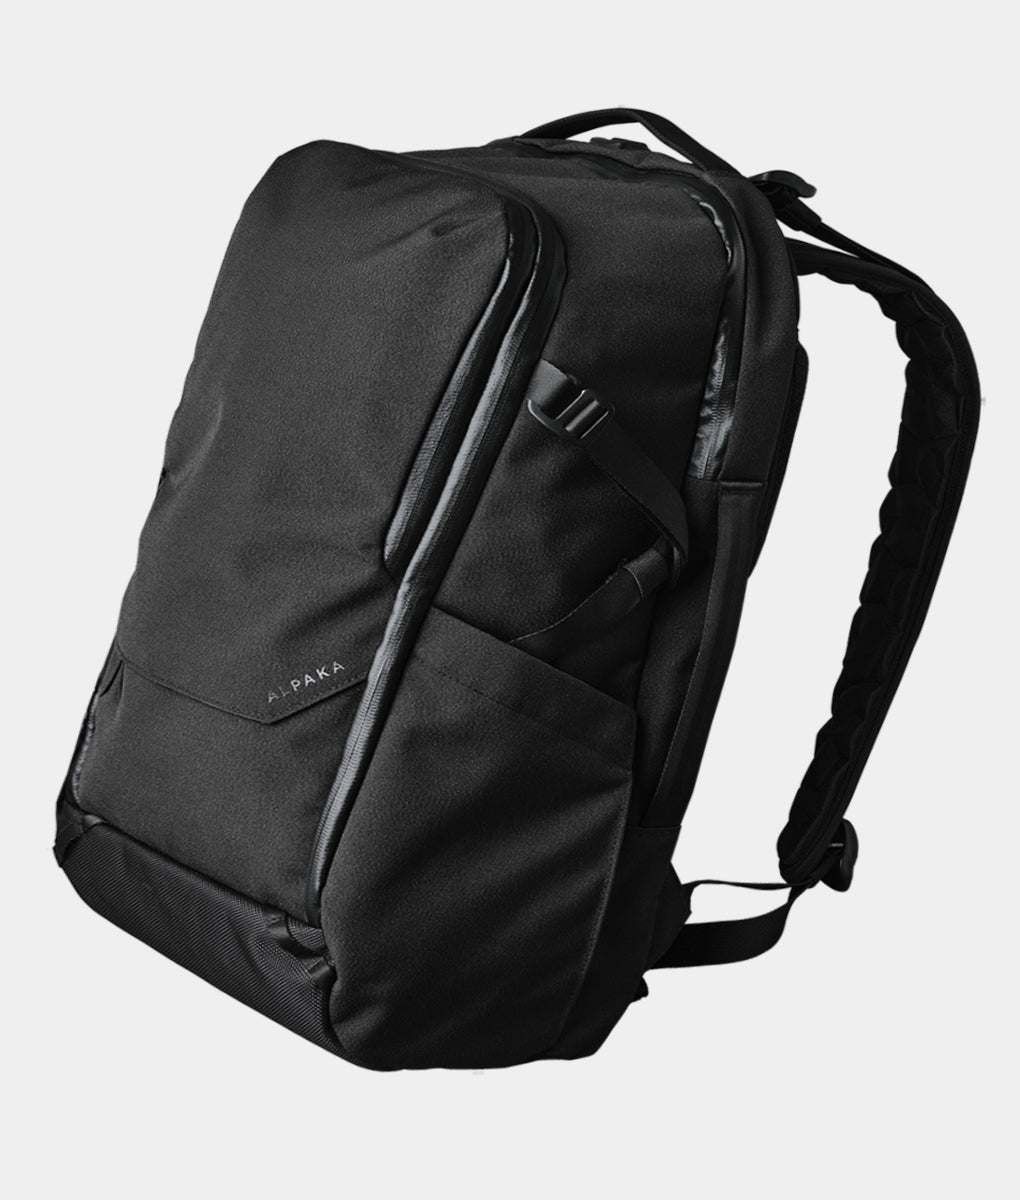 Black Tactical Backpacks: Why Are They So Important?